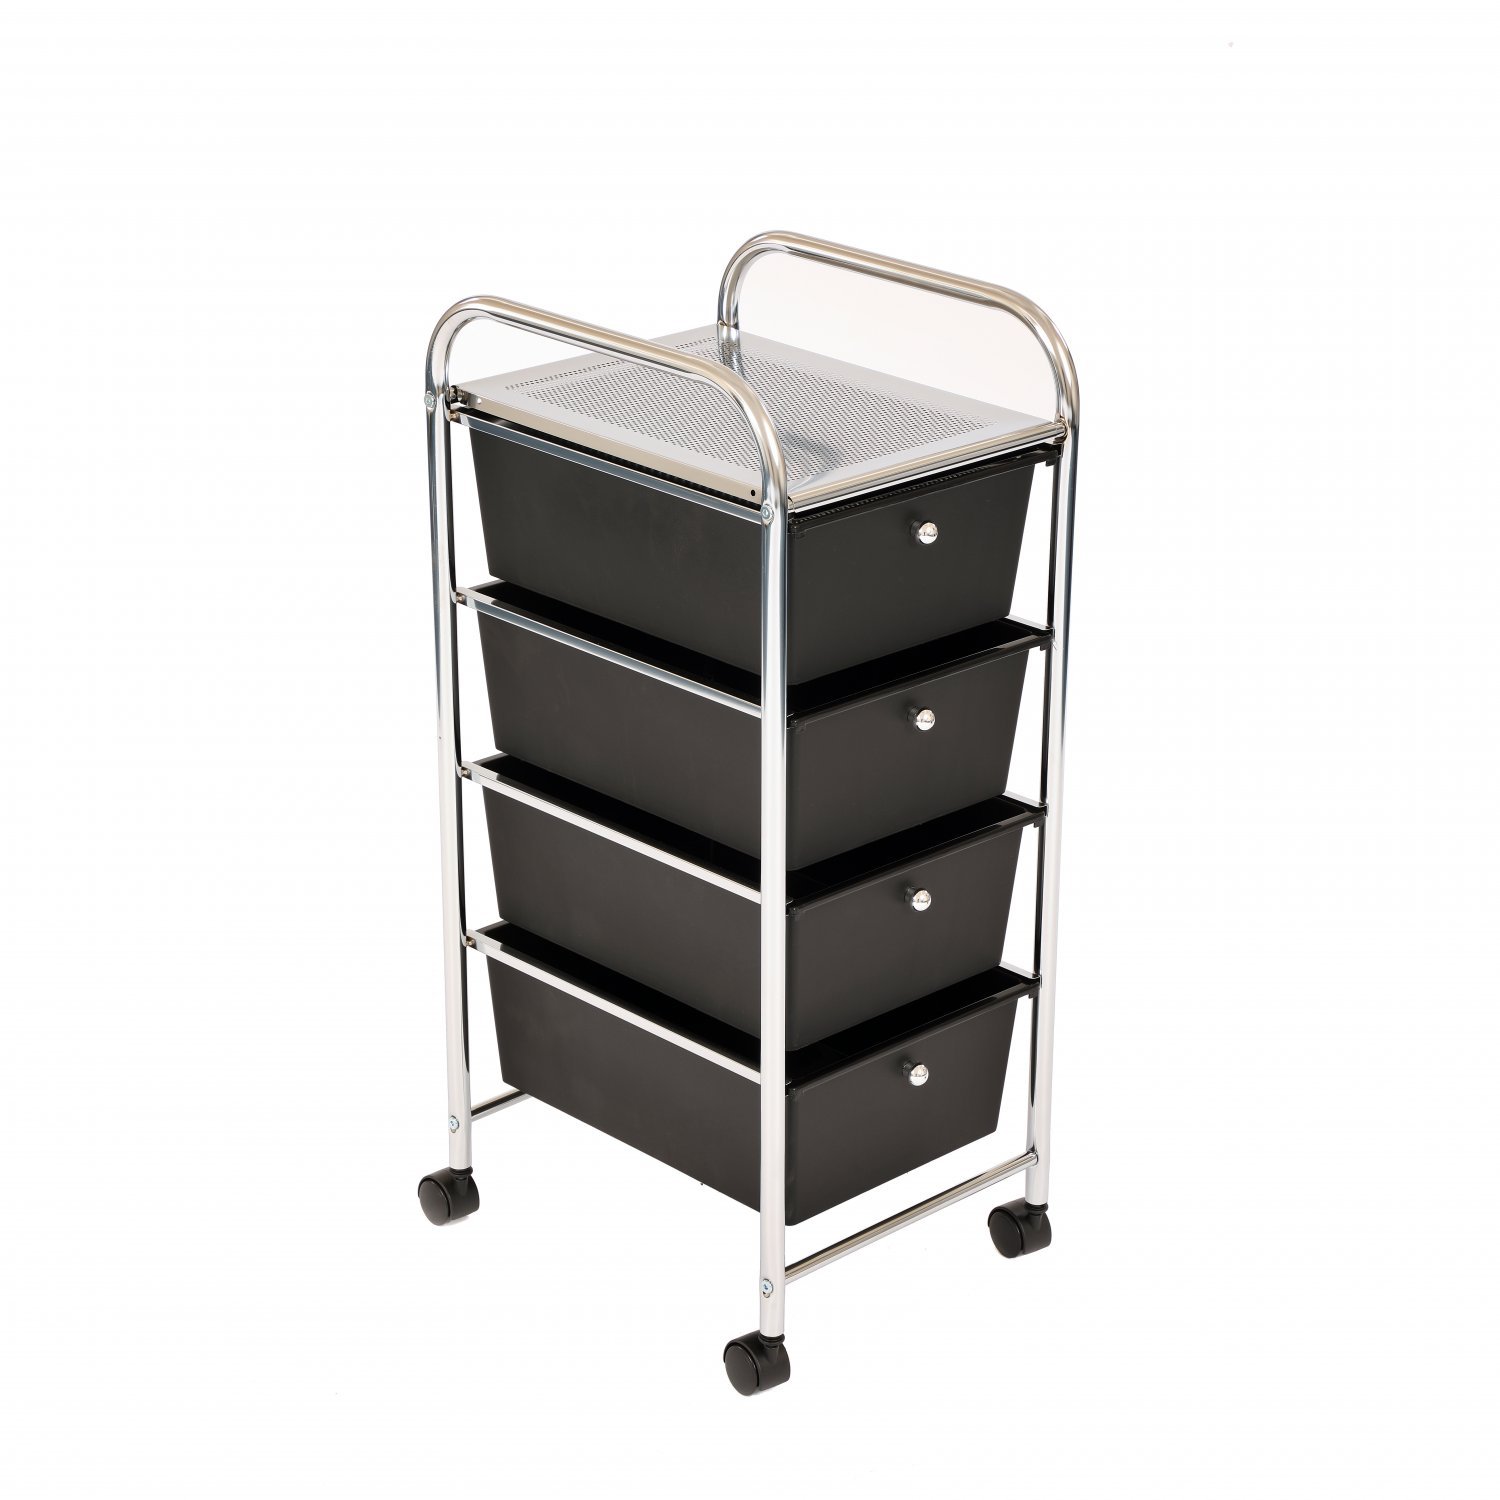 4 levels of Shelving with 4 Castor Wheels for Extra Mobility. Mixed Grey Colour Gradient Beauty and Makeup Organisation BillyOh 4 Drawer Monochrome Storage Trolley For Home Office Stationery 